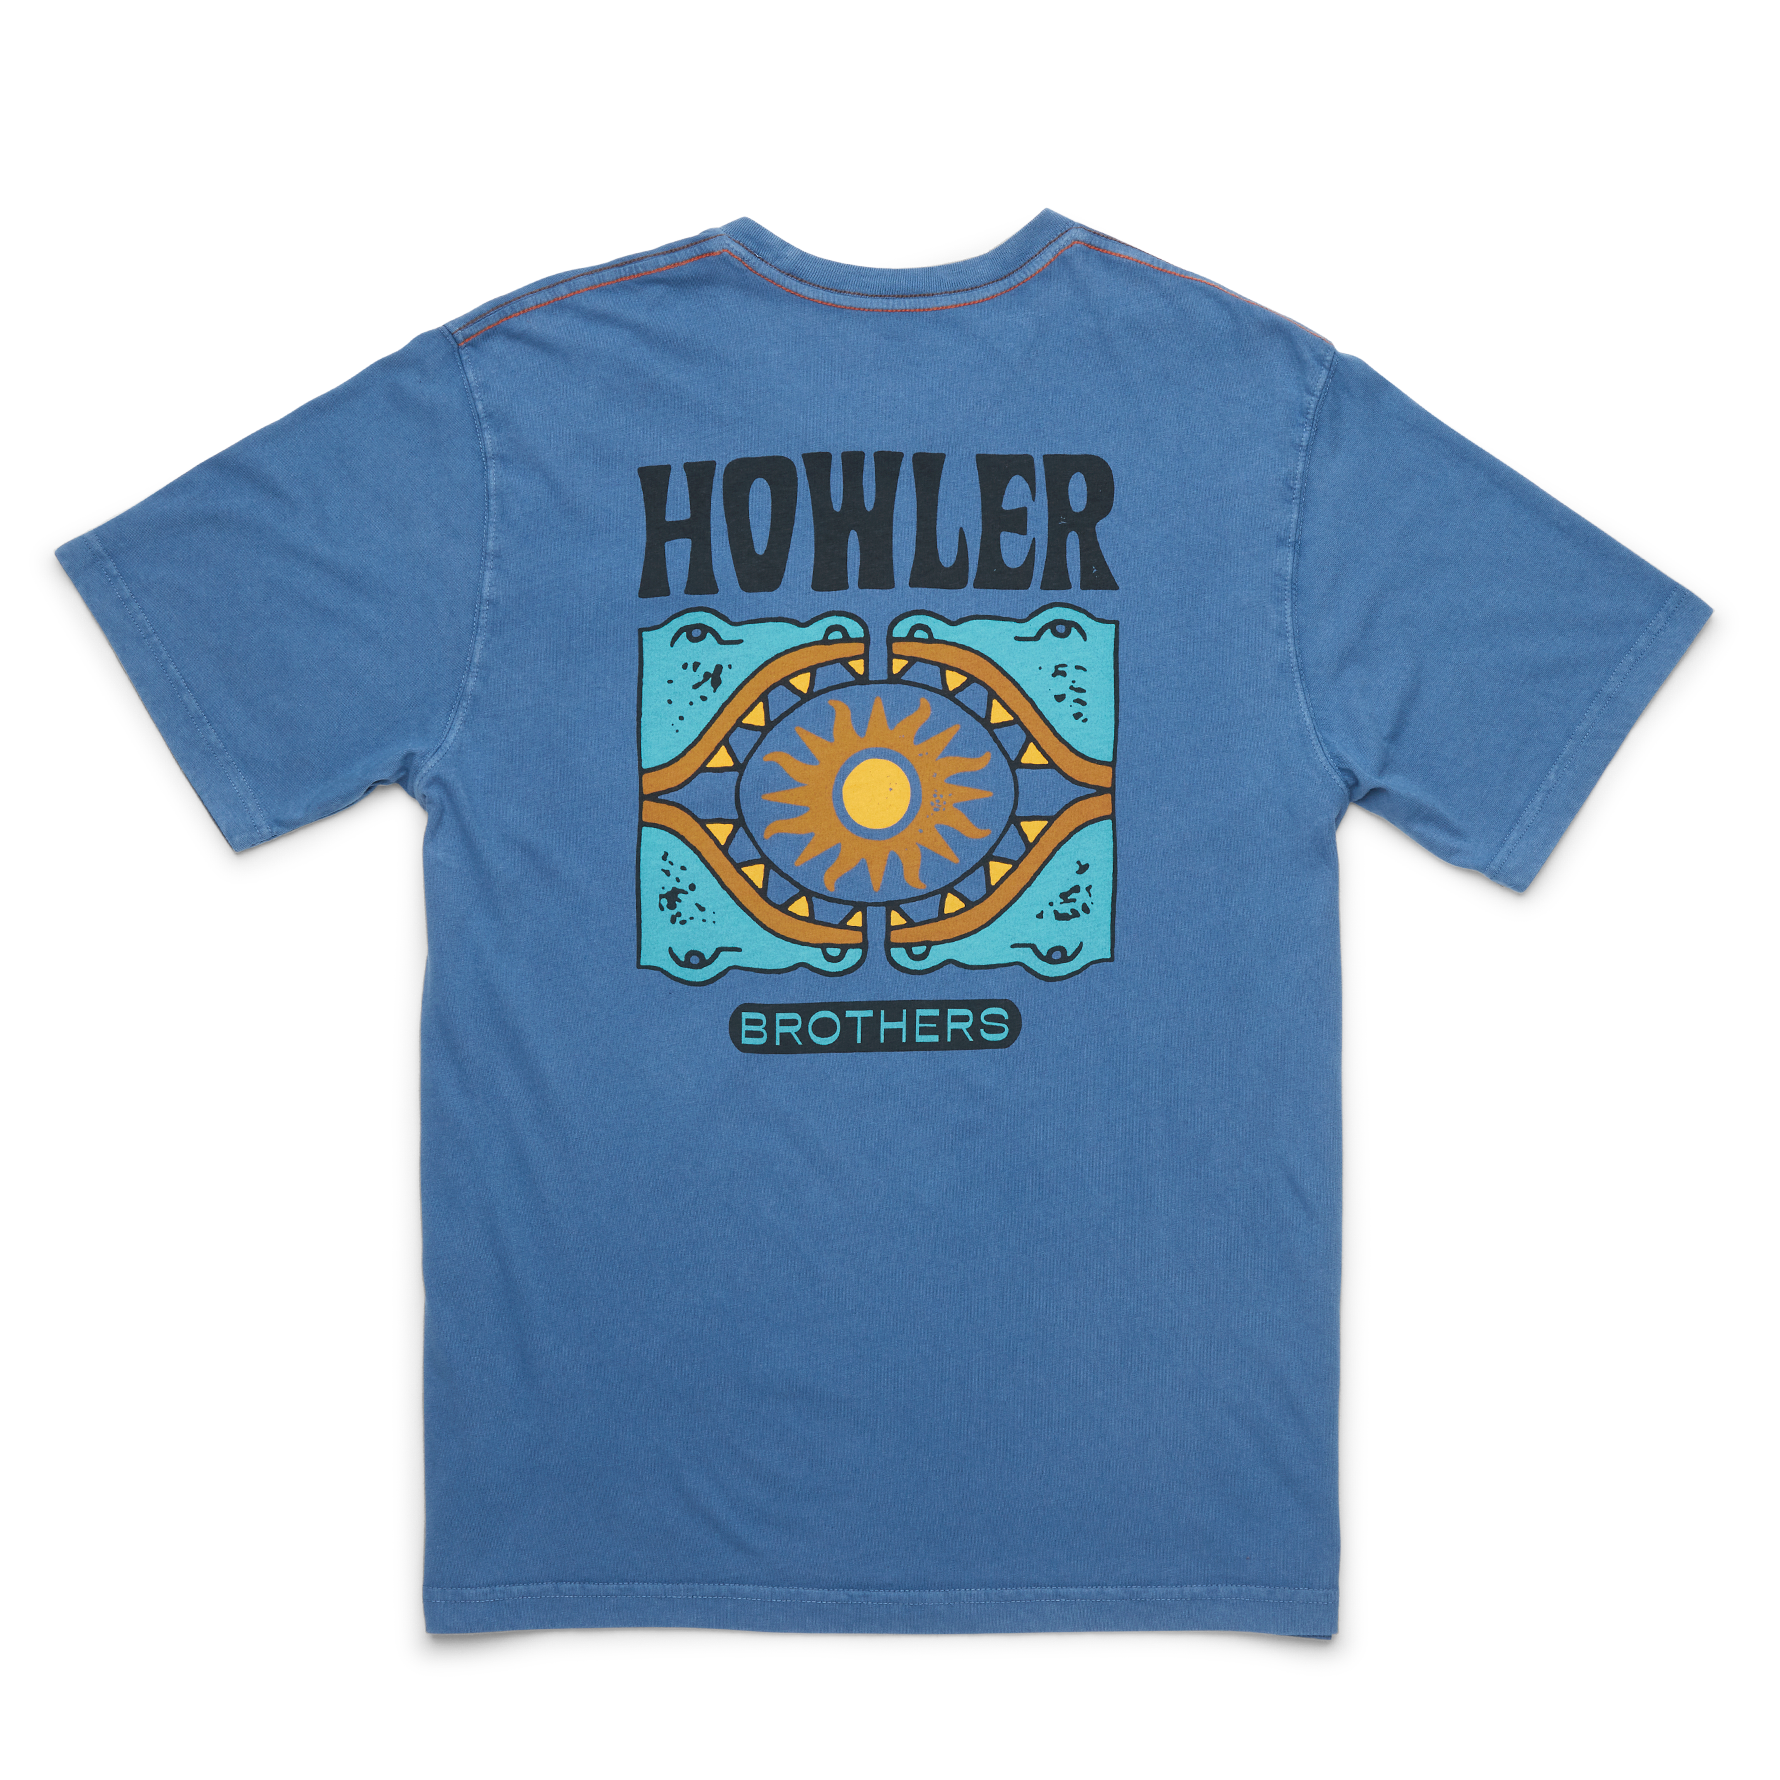 Howler Brothers Cotton Pocket T-Shirt